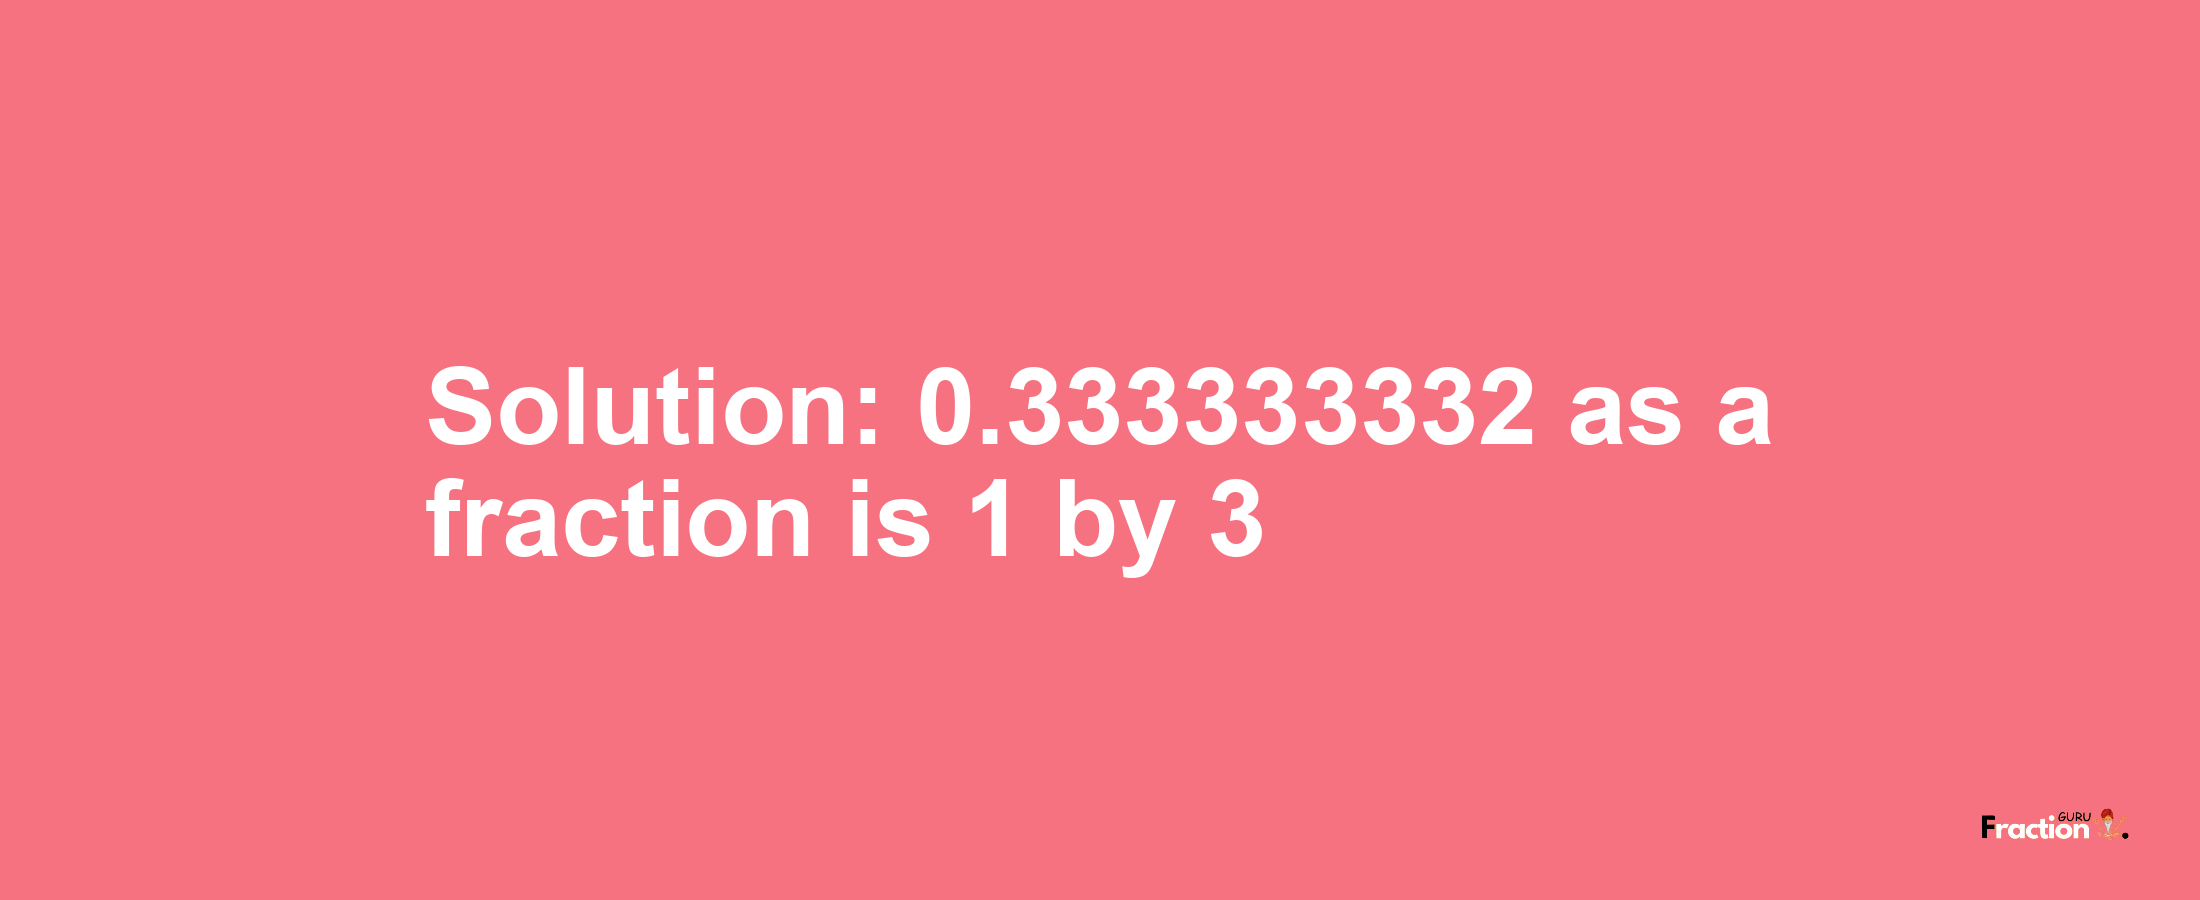 Solution:0.333333332 as a fraction is 1/3